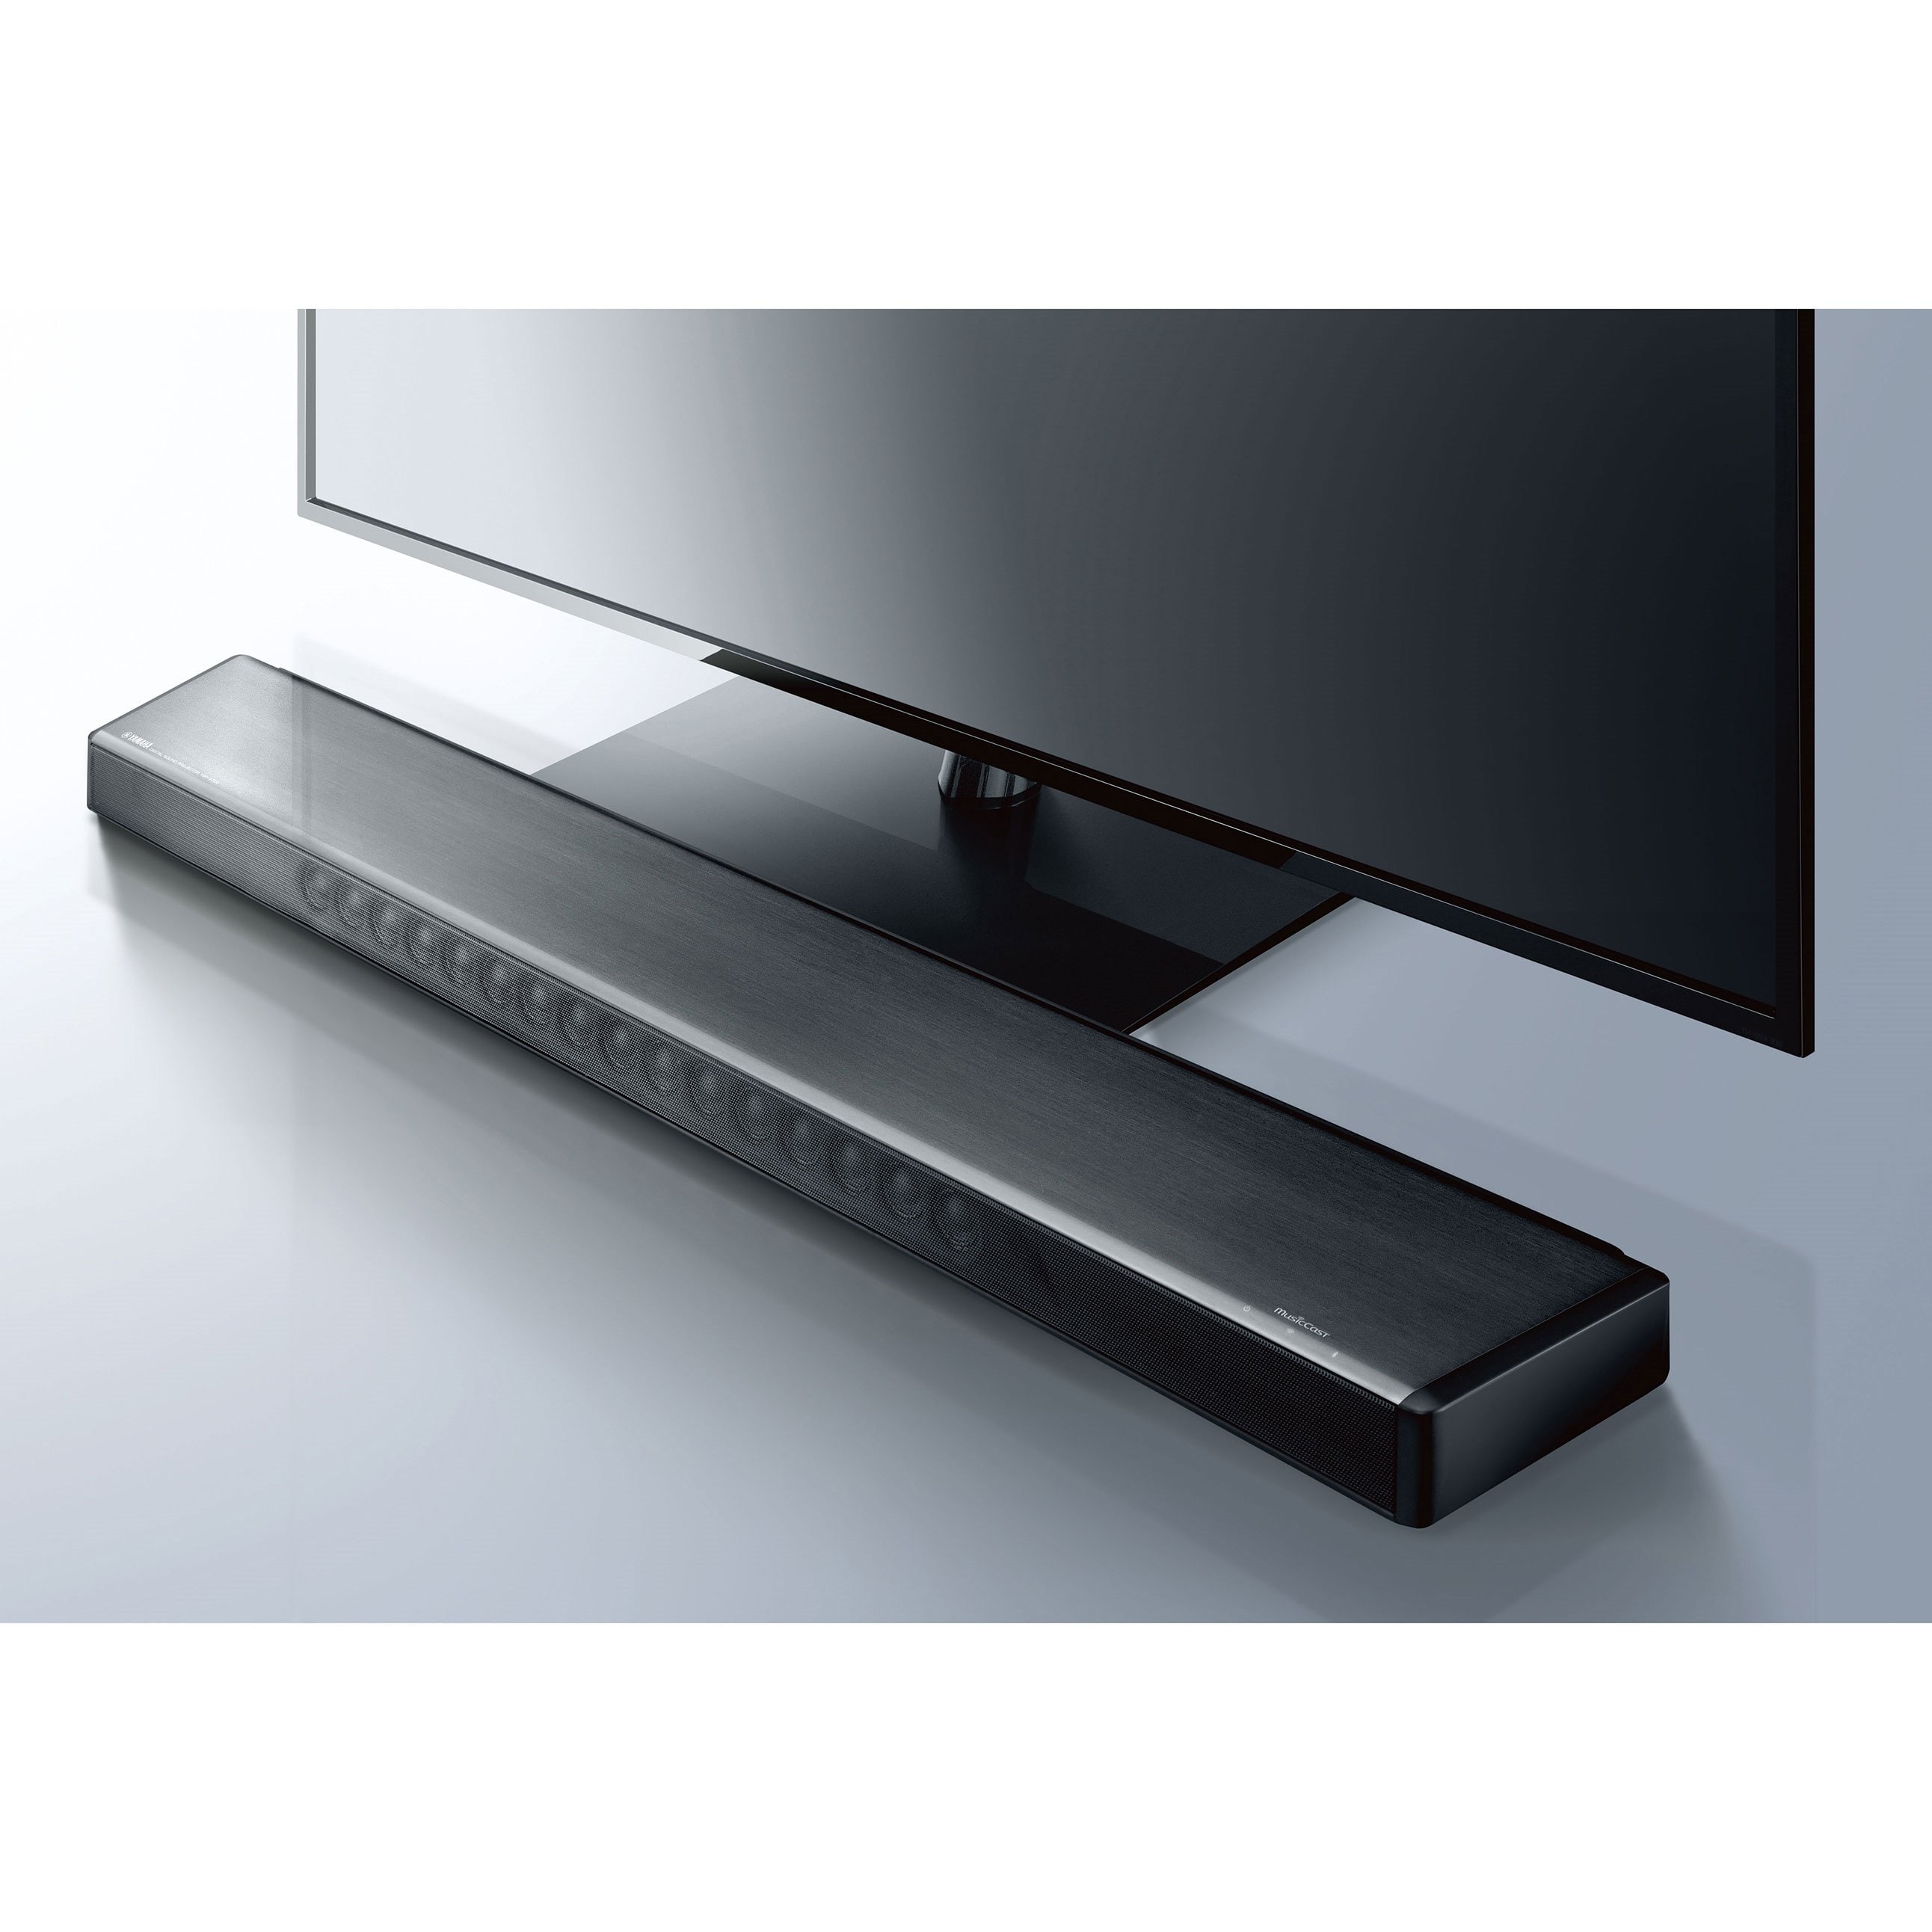 YSP-2700 - Overview - Sound Bars - Audio & Visual - Products